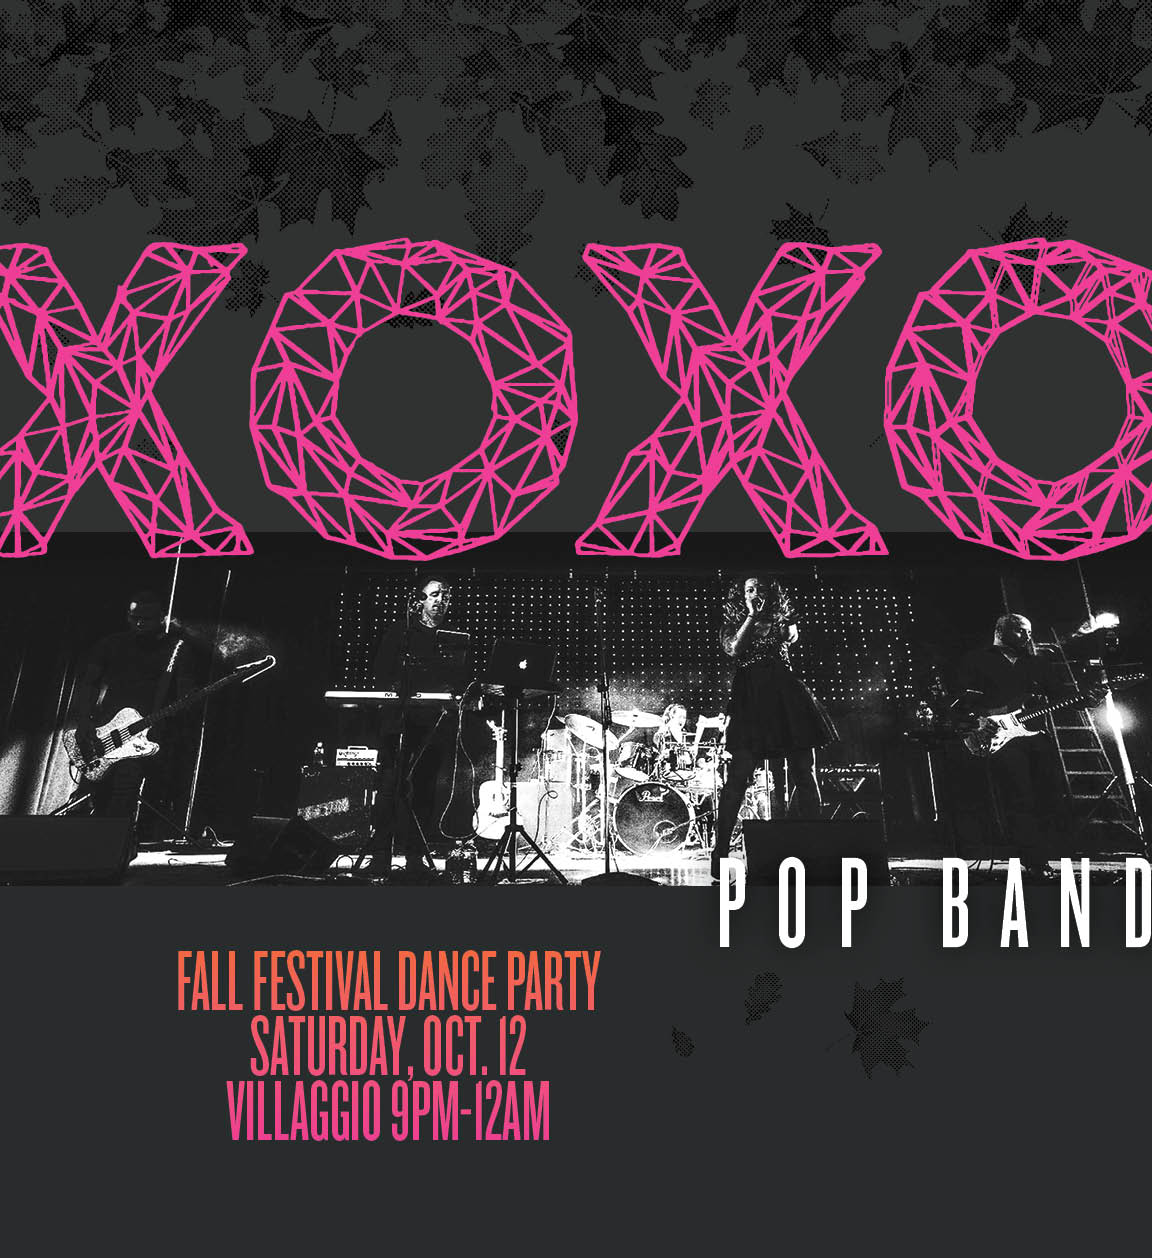 Fall Festival Dance Party with XOXO Pop Band